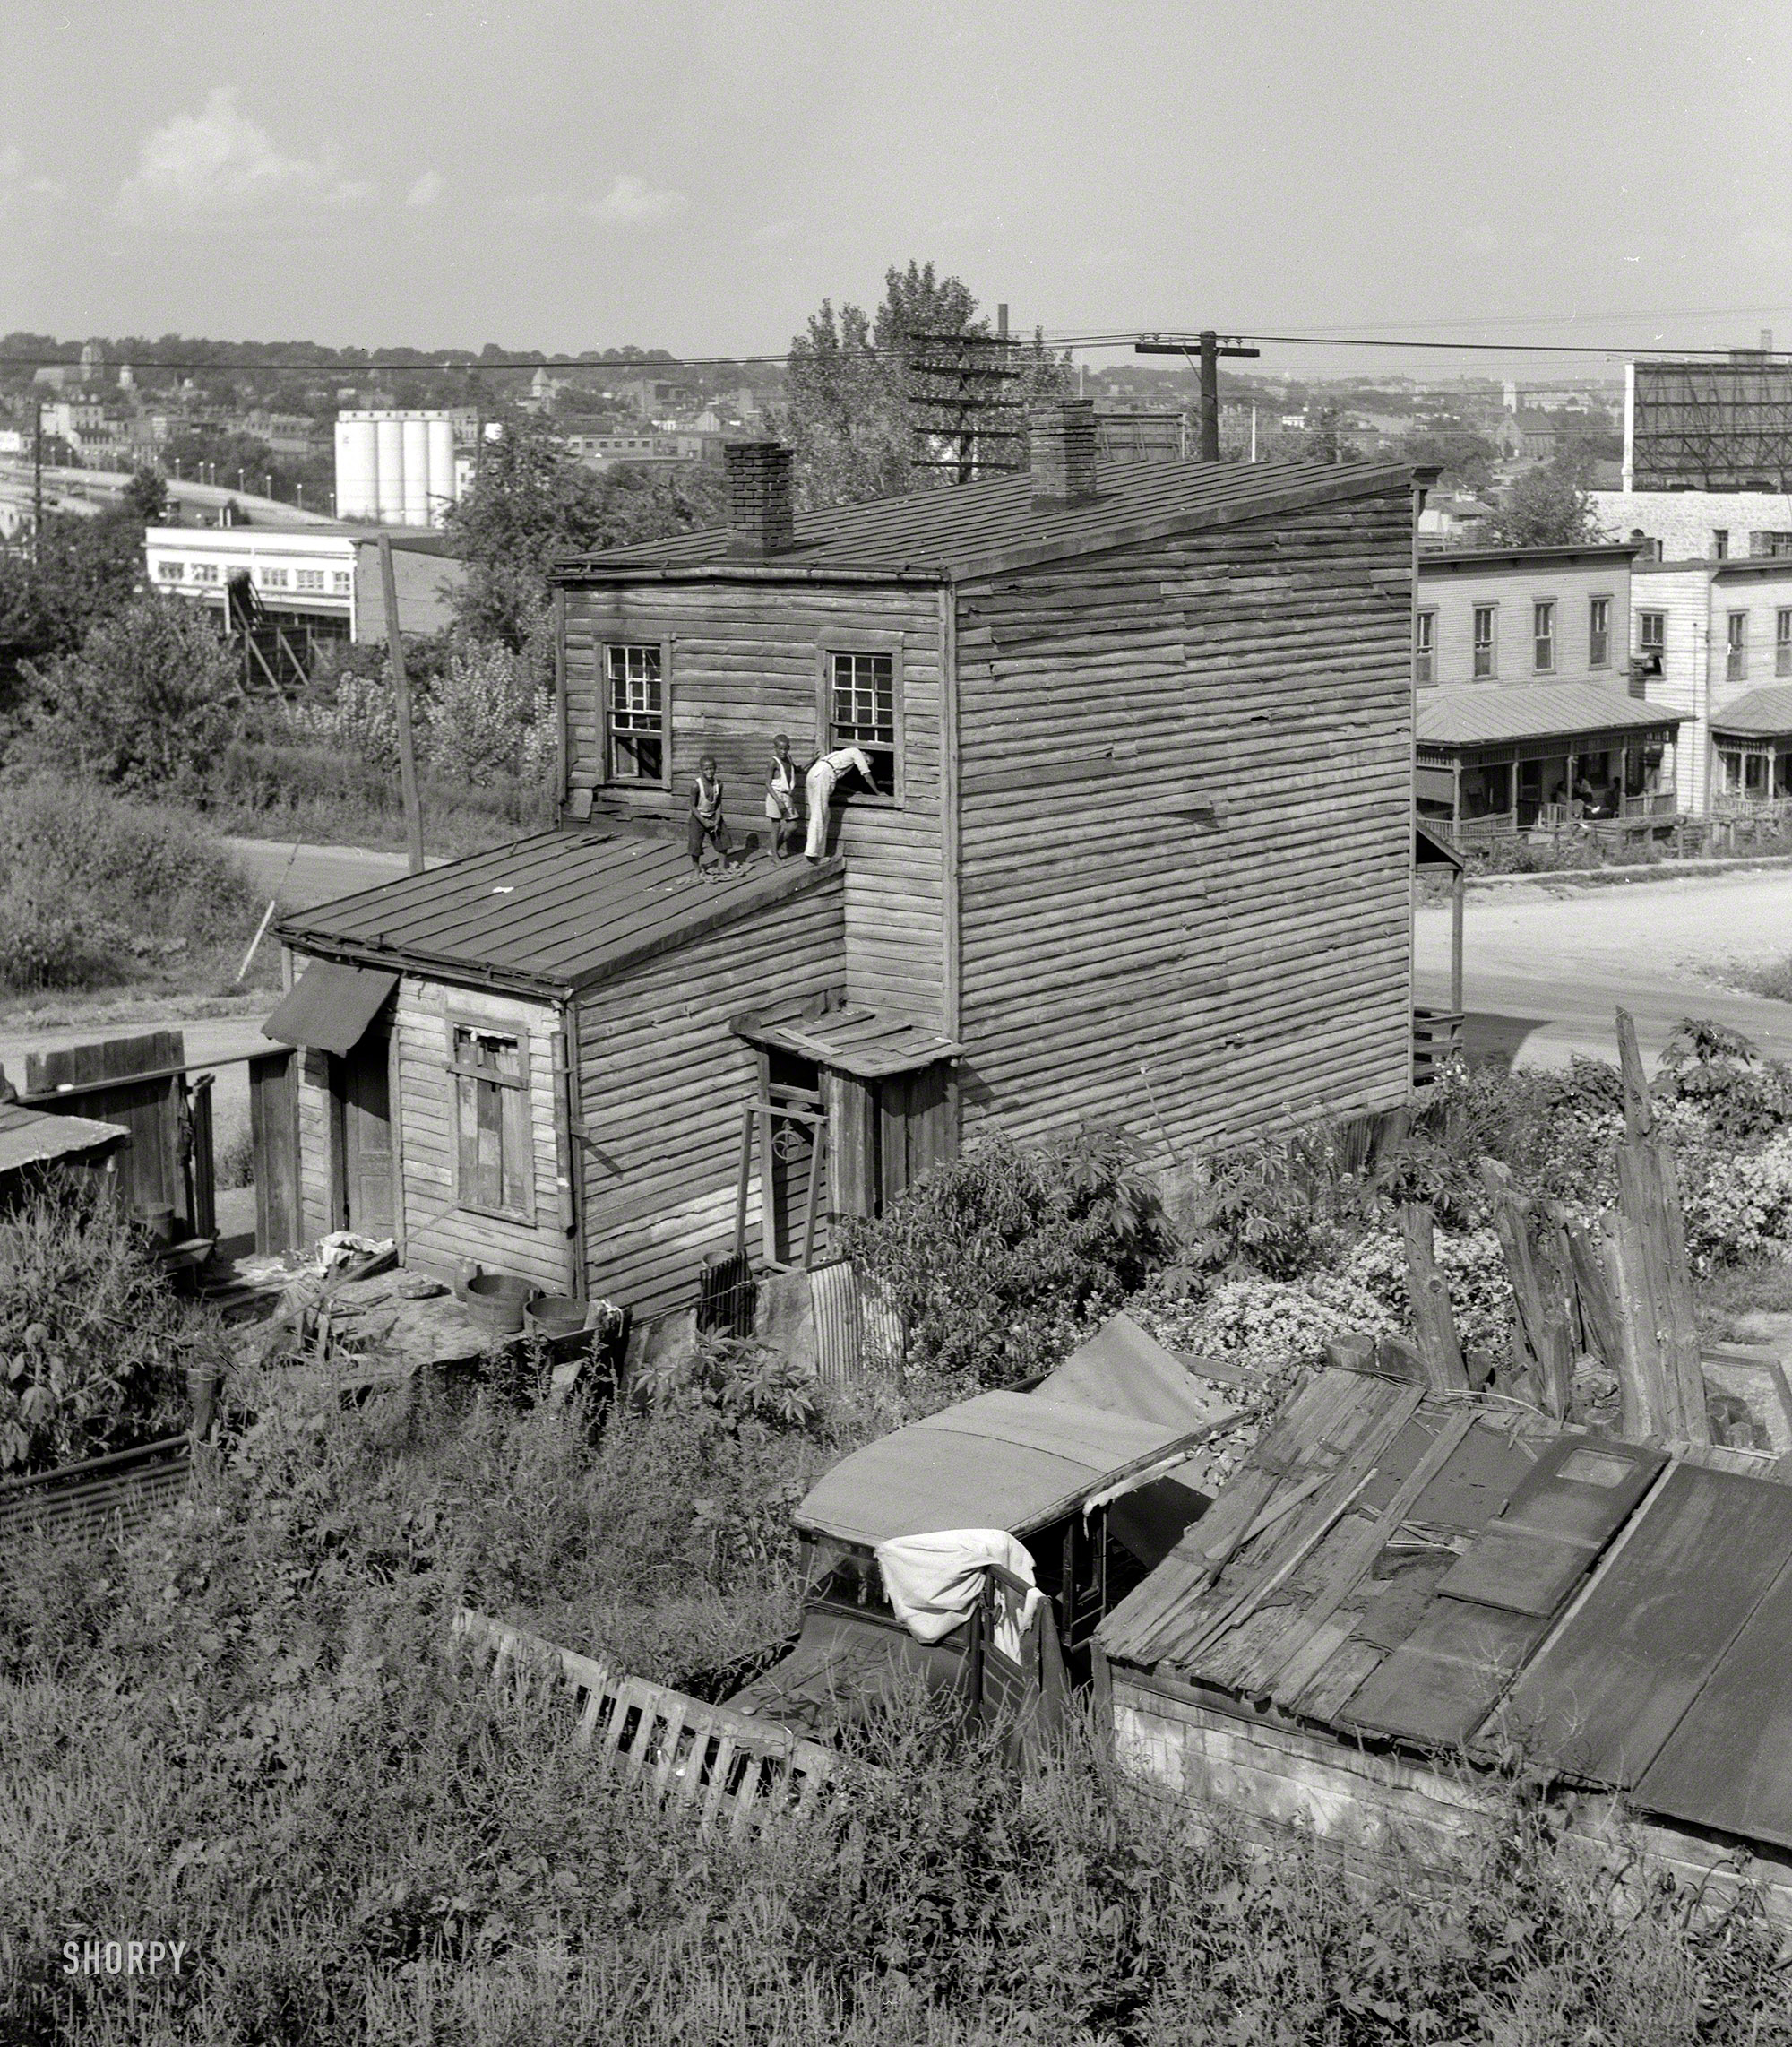 September 1937. "House in Negro quarter of Rosslyn, Virginia." Washington, D.C., and the Key Bridge form the background for this curious scene. Medium-format negative by John Vachon. View full size.